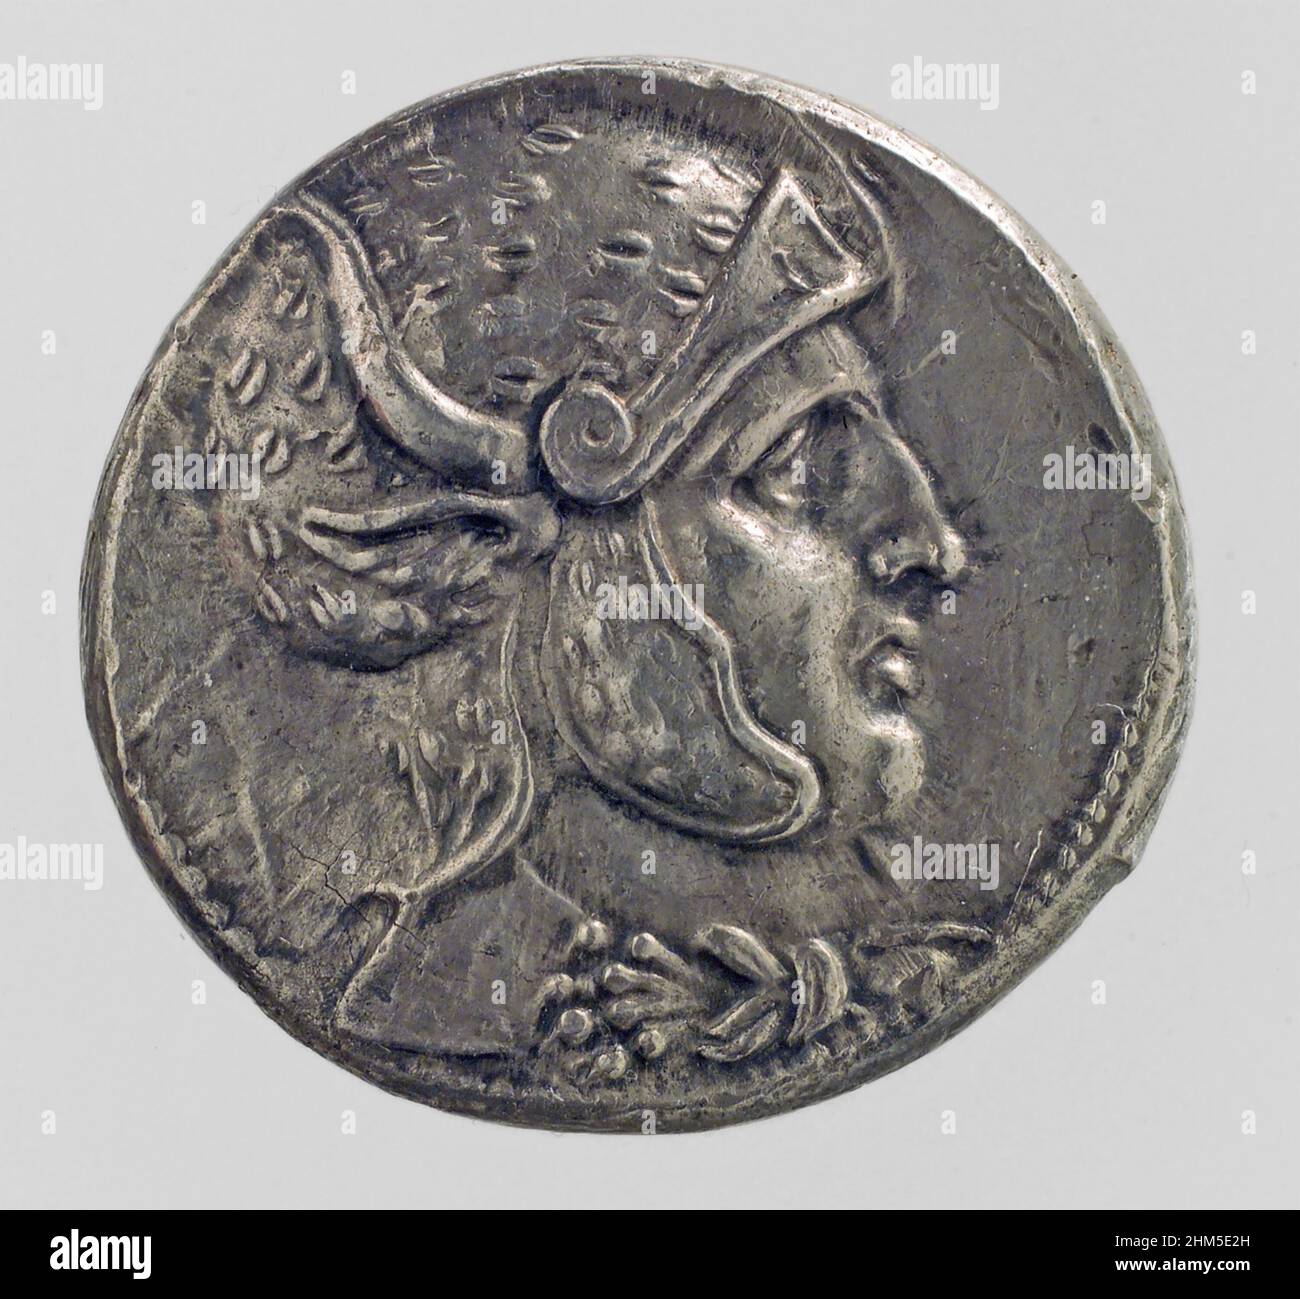 SELEUCUS I NICATOR (c 358 BC-281 BC) Macedonian Greek General on a coin in the collection of the New York Metropolitan Art Museum Stock Photo